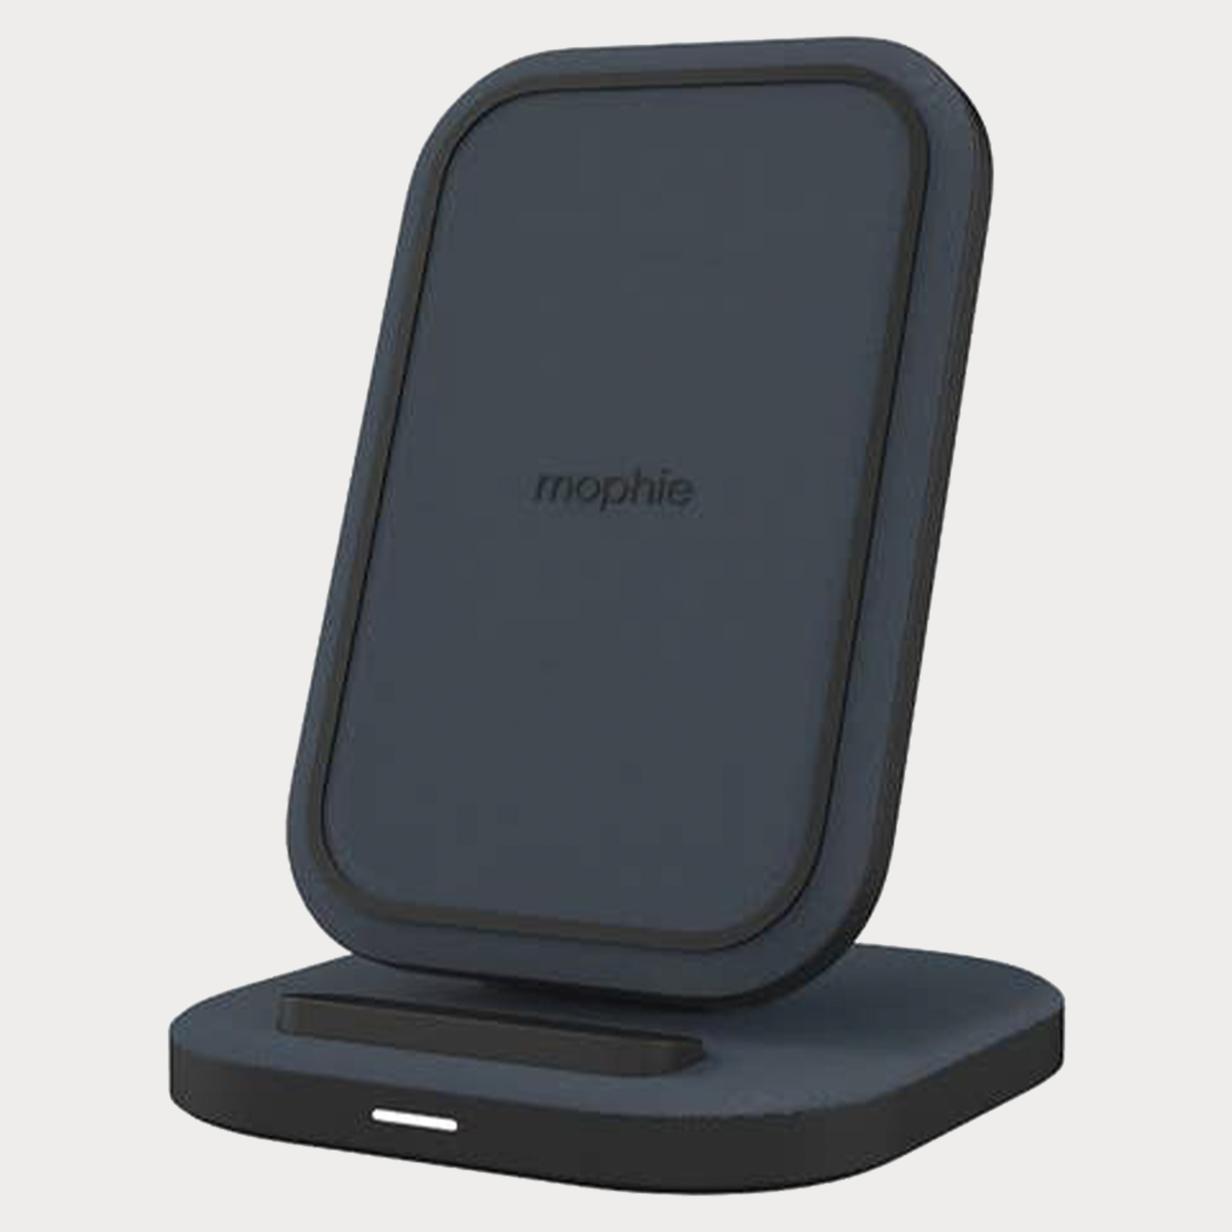 Moment mophie 401305903 Wireless Charging Stand 15w 01